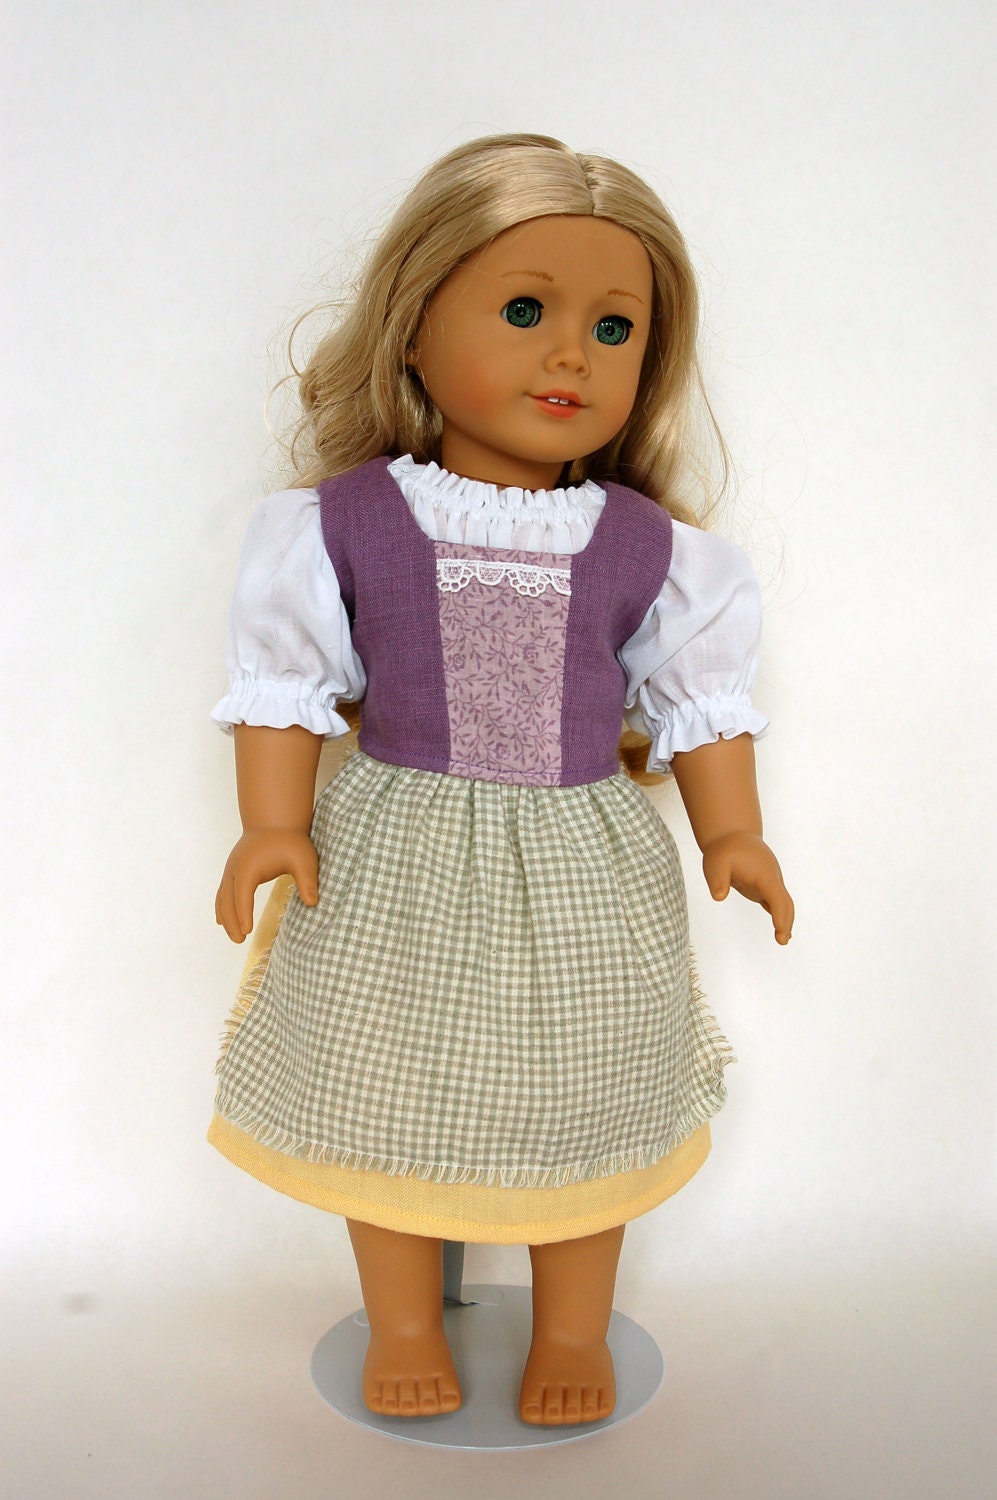 Lavender Hobbit Outfit Medieval Peasant Folk Costume American Girl 18 Inch Doll Dress